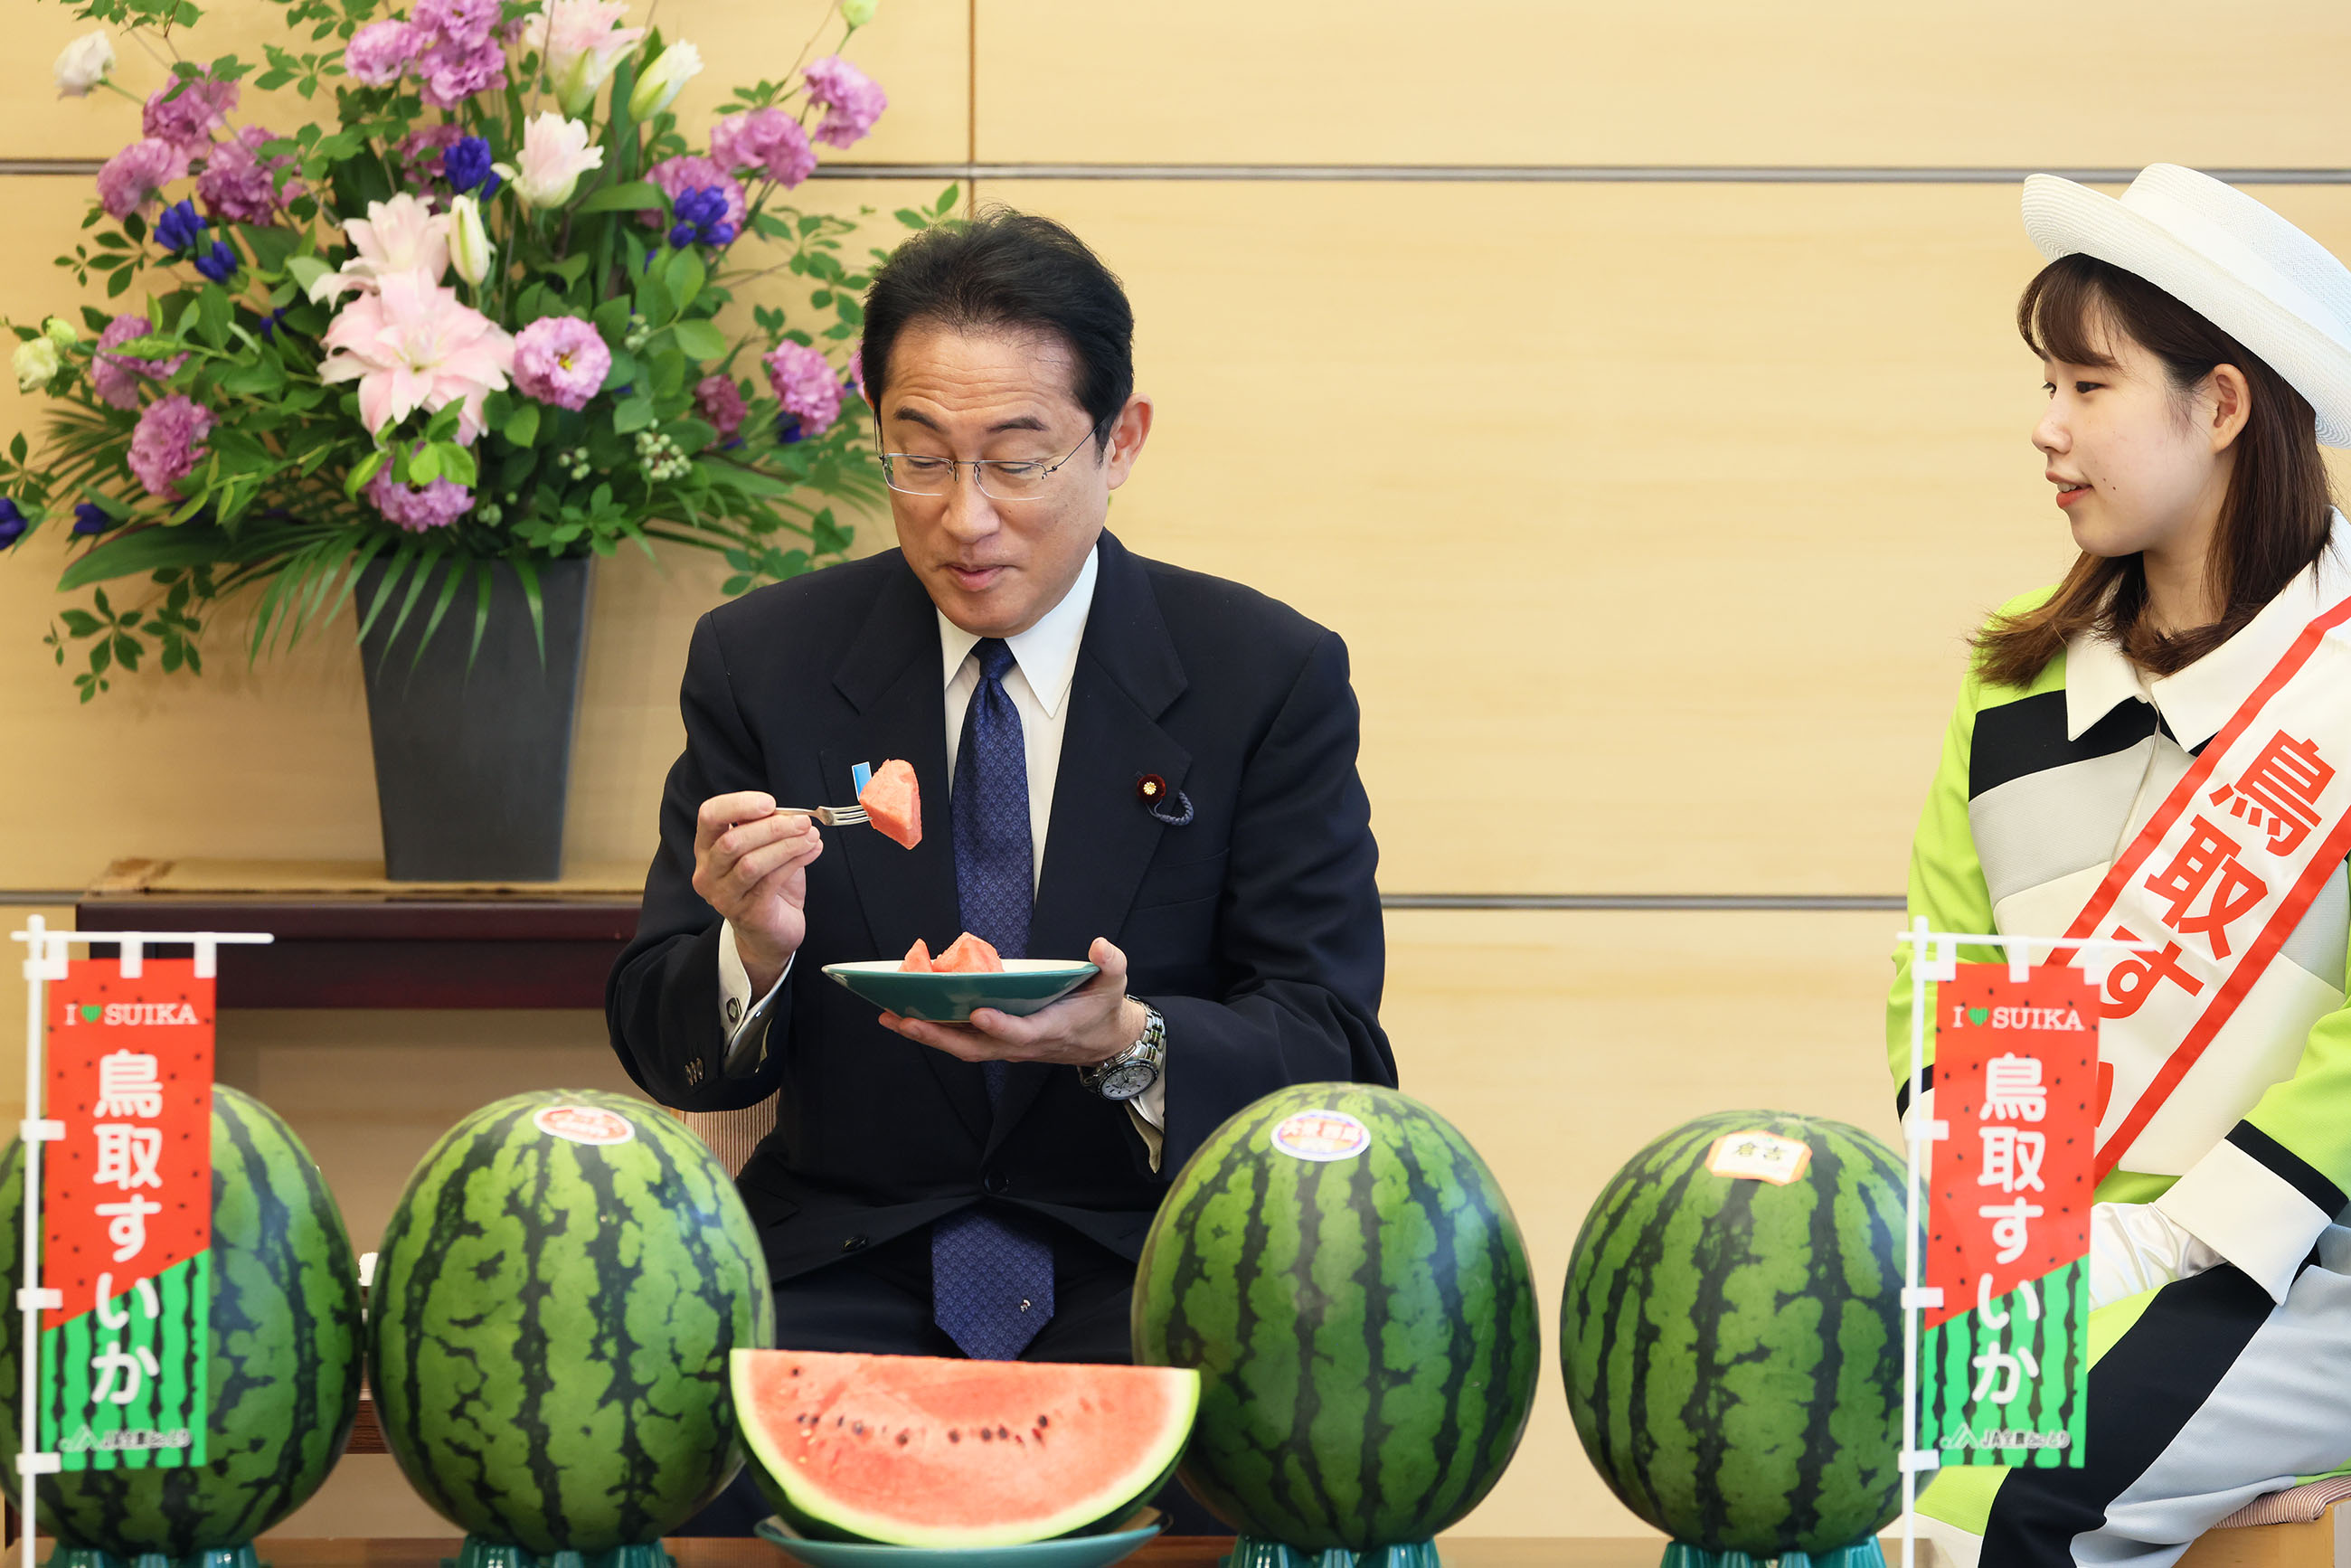 Prime Minister Kishida being presented with watermelons (3)